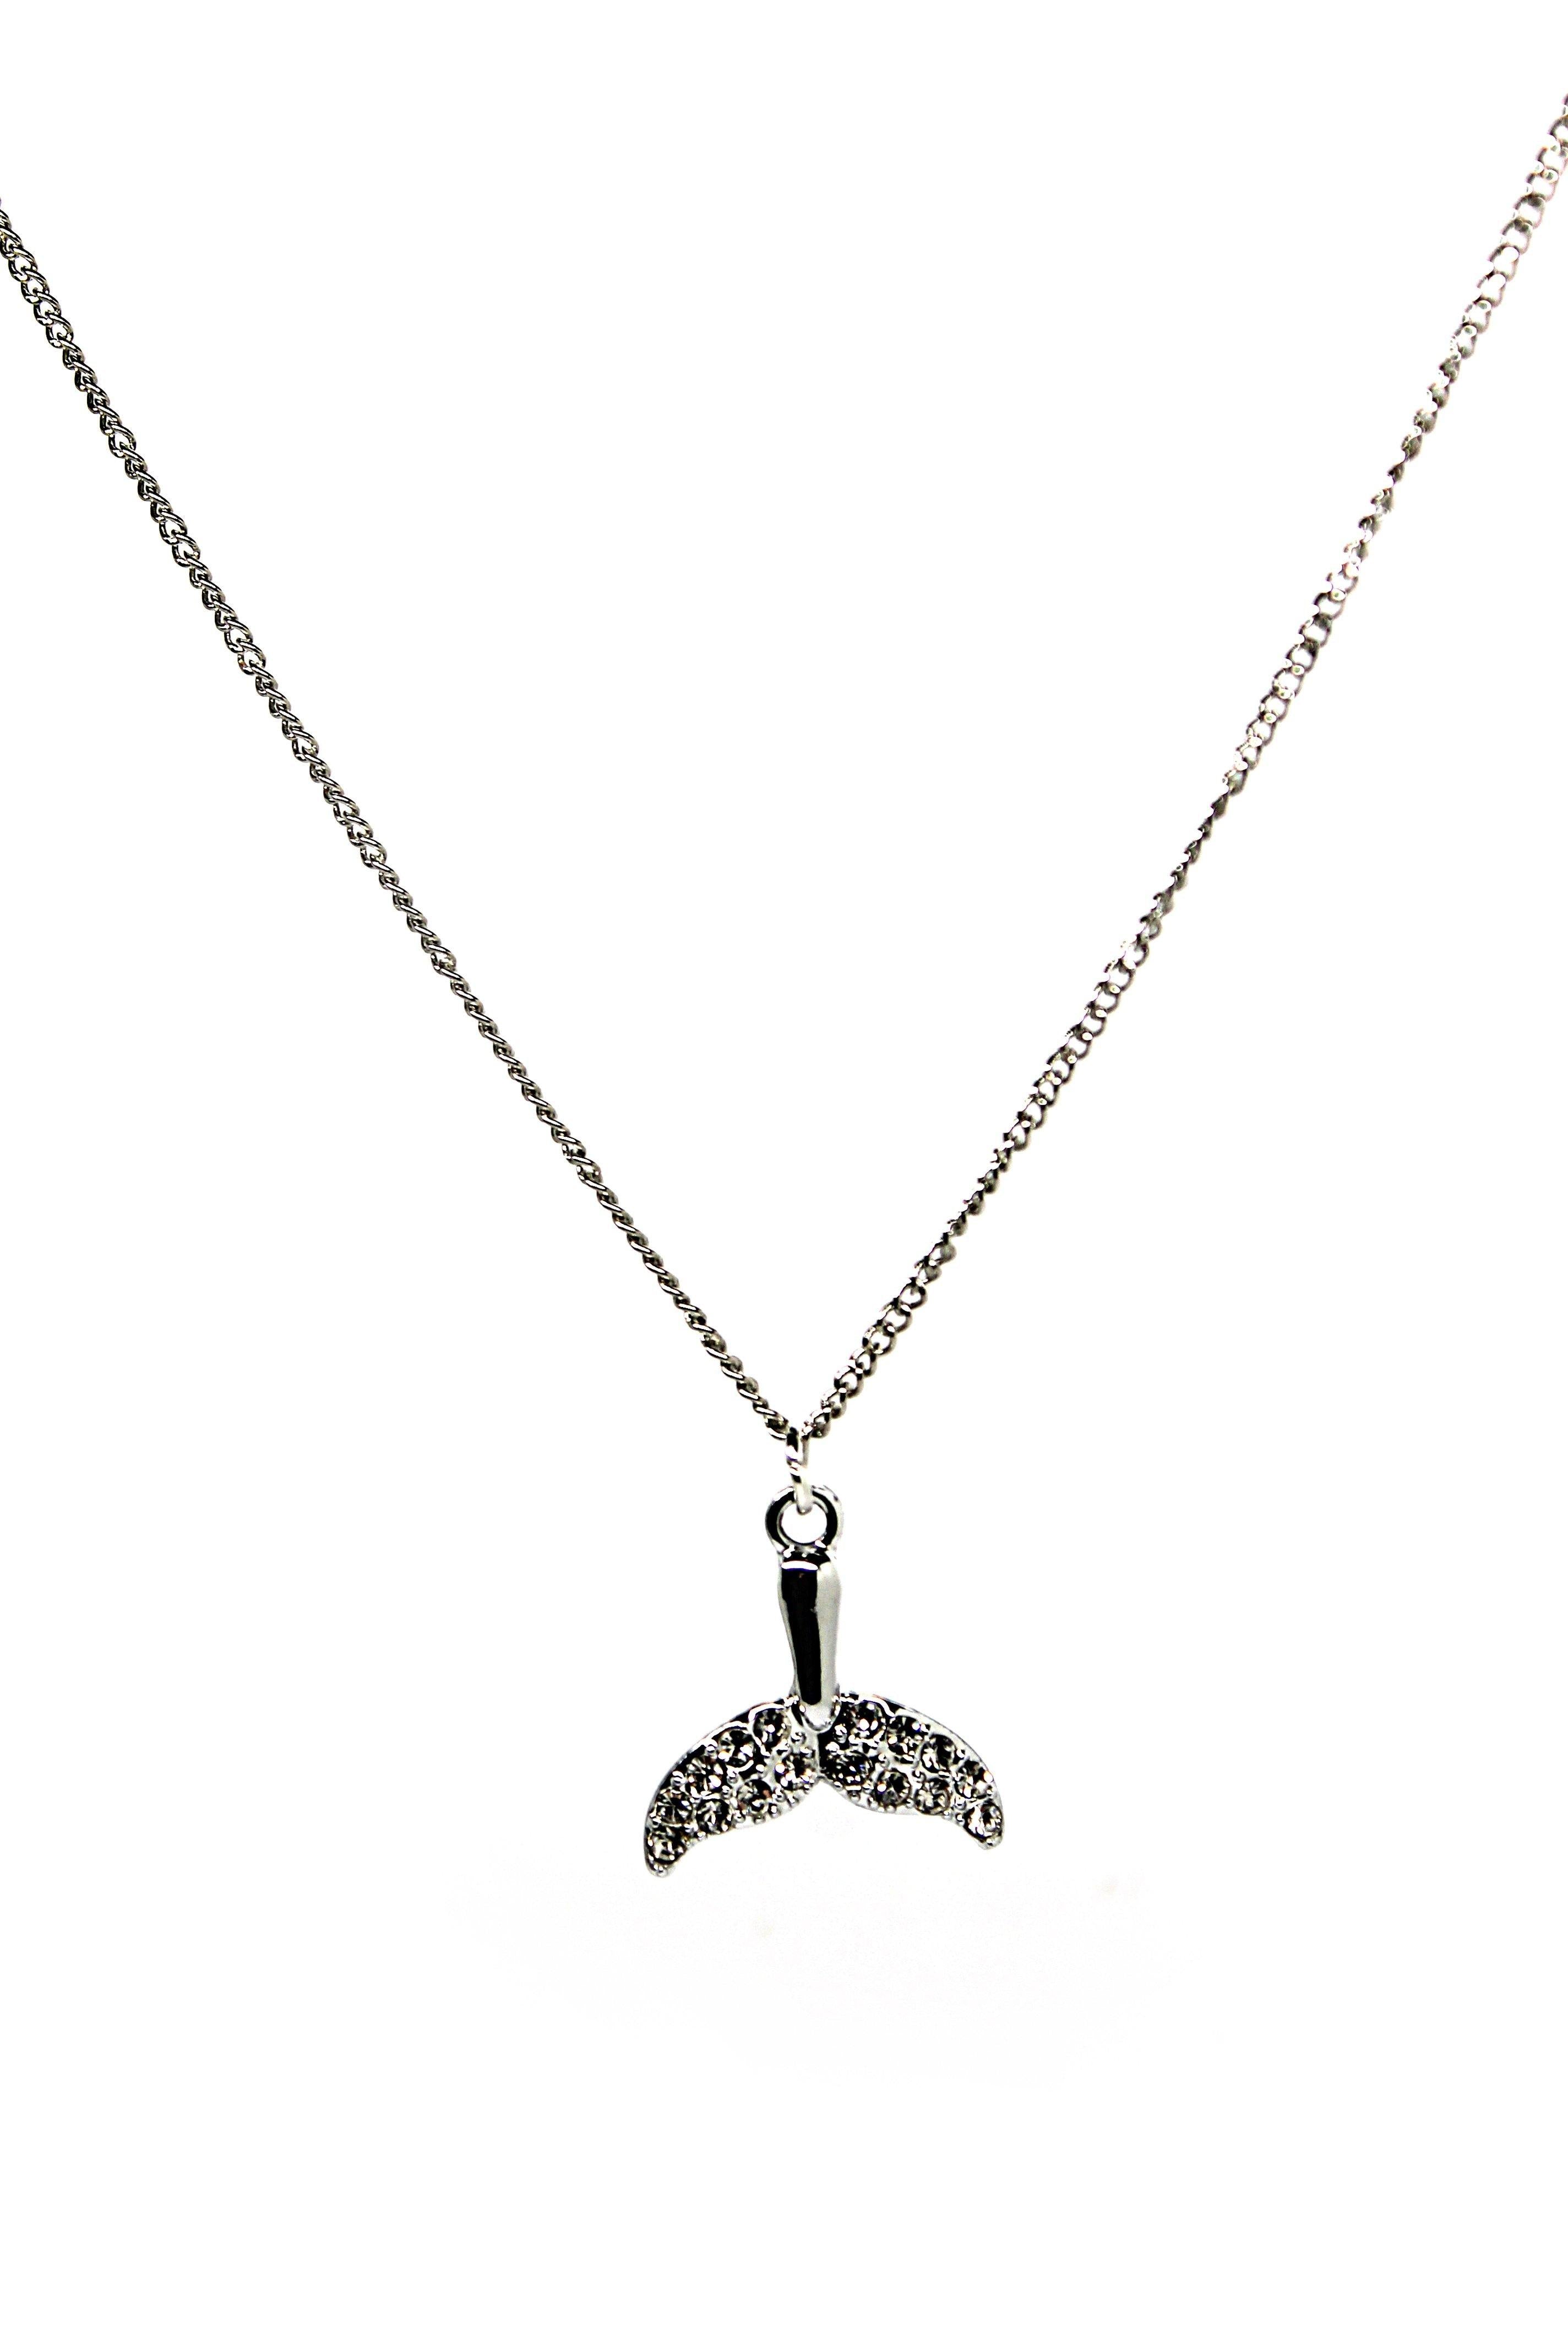 Whale Tail Necklace - Wildtouch - Wildtouch